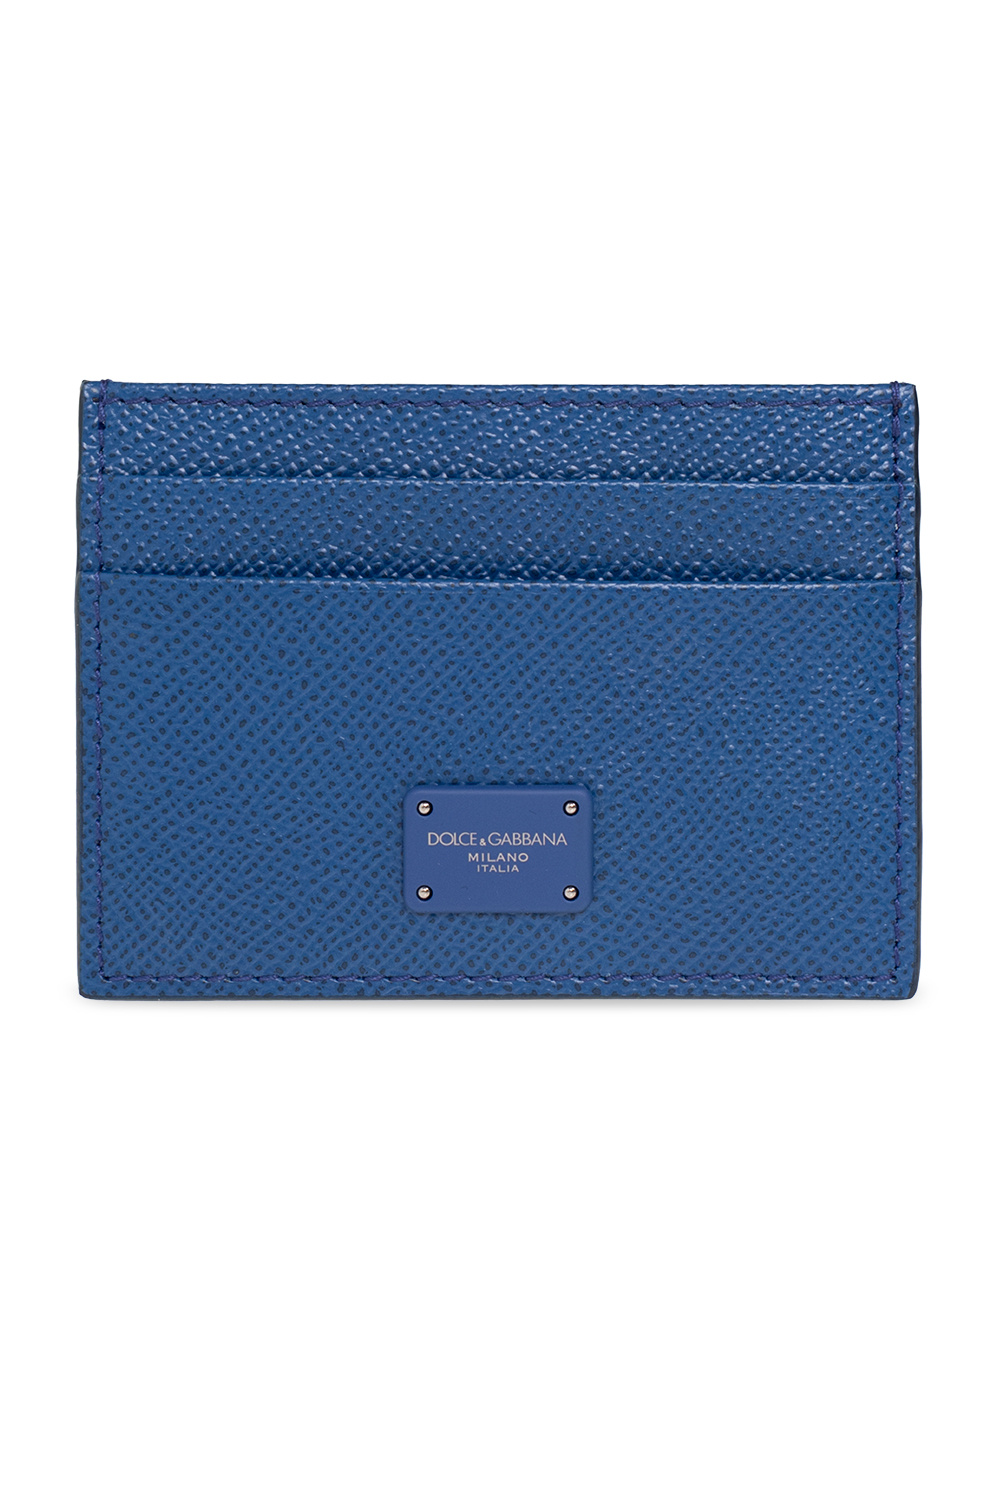 Dolce & Gabbana Dg Logo Leather Card Case in Blue Womens Accessories Wallets and cardholders 